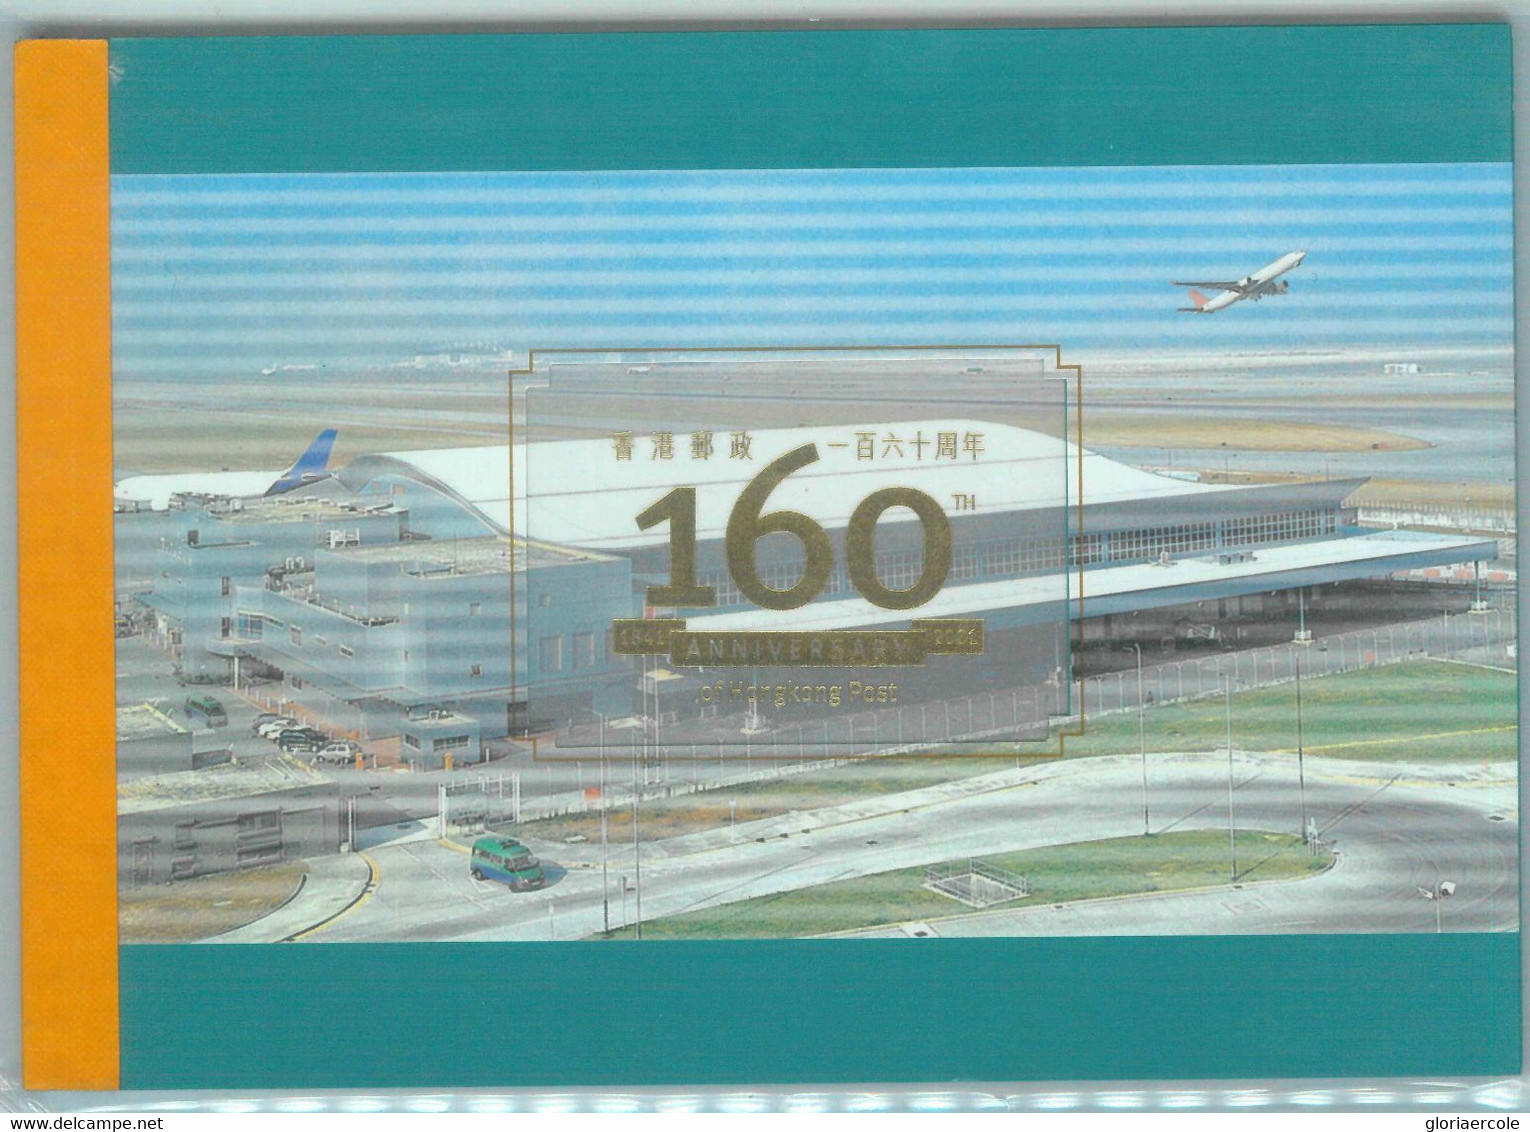 87542 - HONG KONG -  PRESTIGE BOOKLET: 2001 The 160th Anniversary Post Office - Carnets